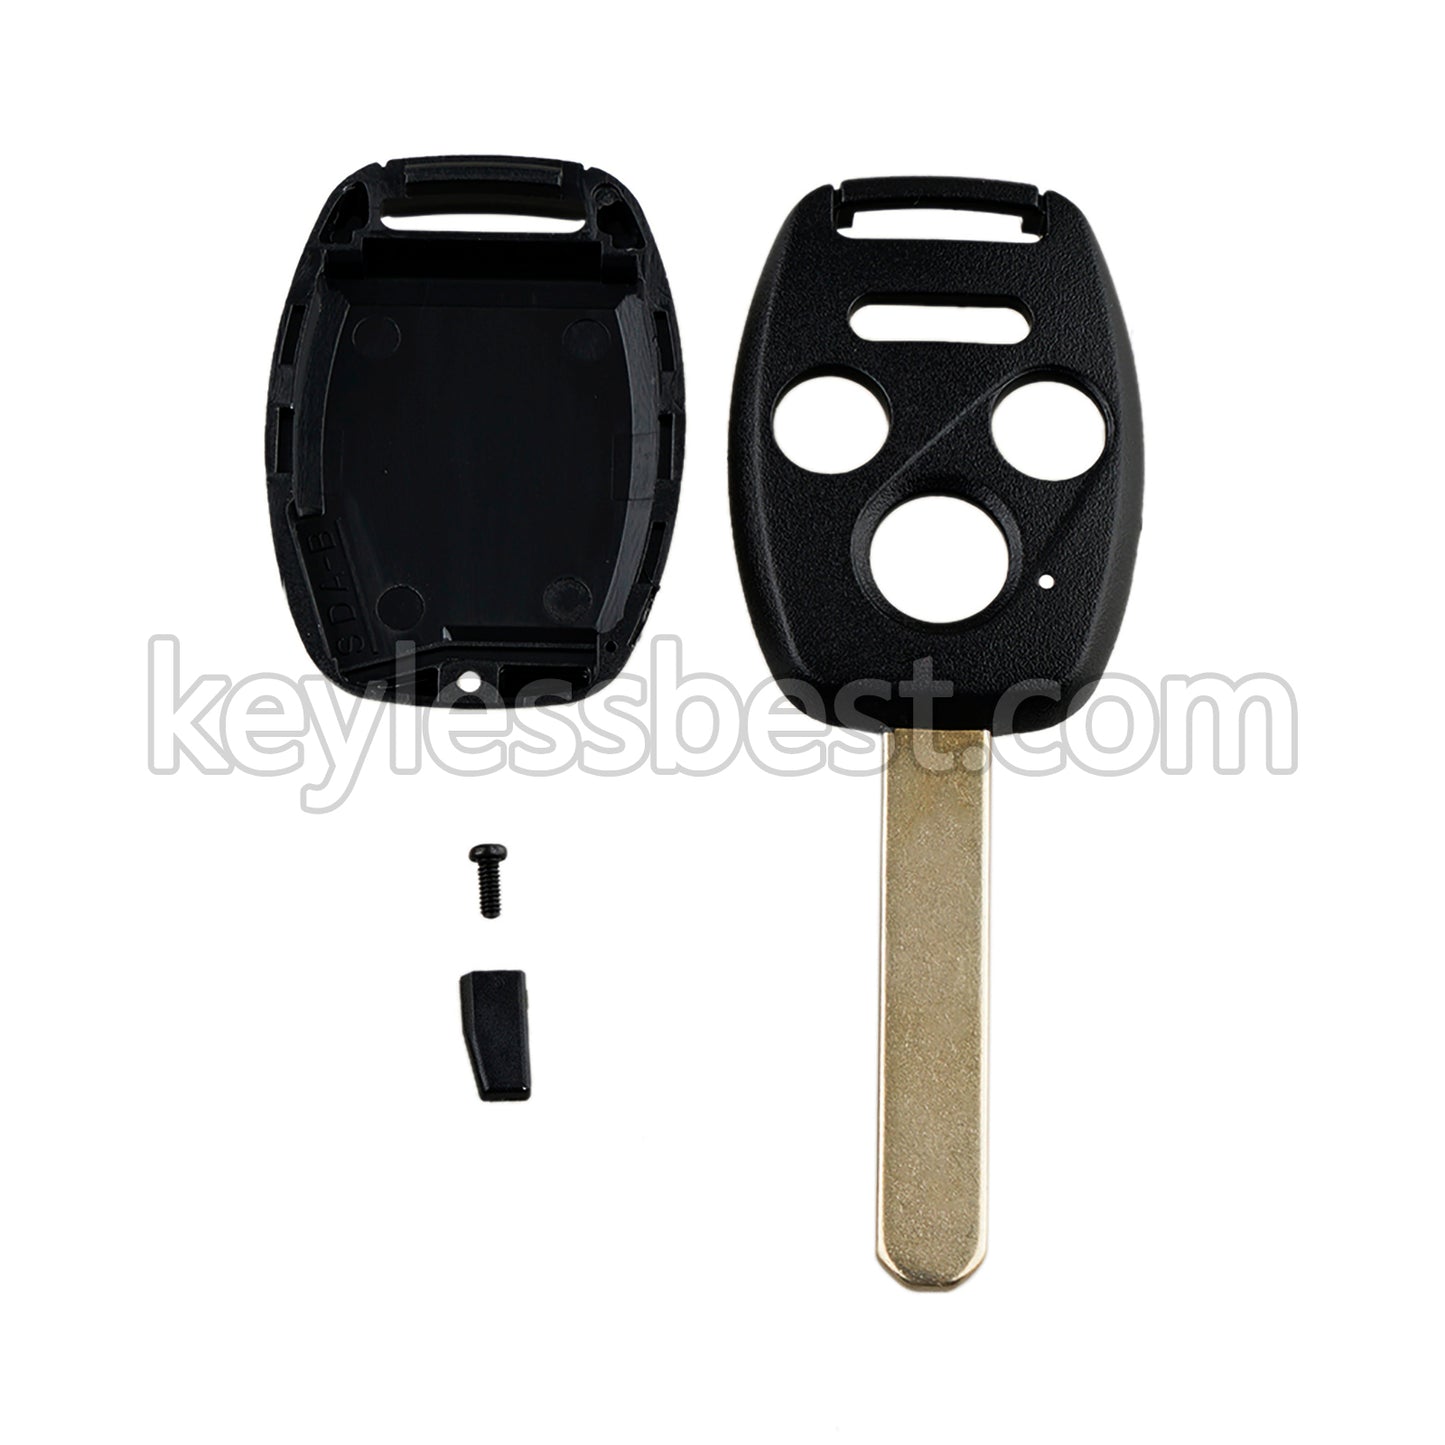 2005-2014 Honda Odyssey Ridgeline Fit / 3 Buttons Remote Key / OUCG8D-380H-A / 313.8MHz